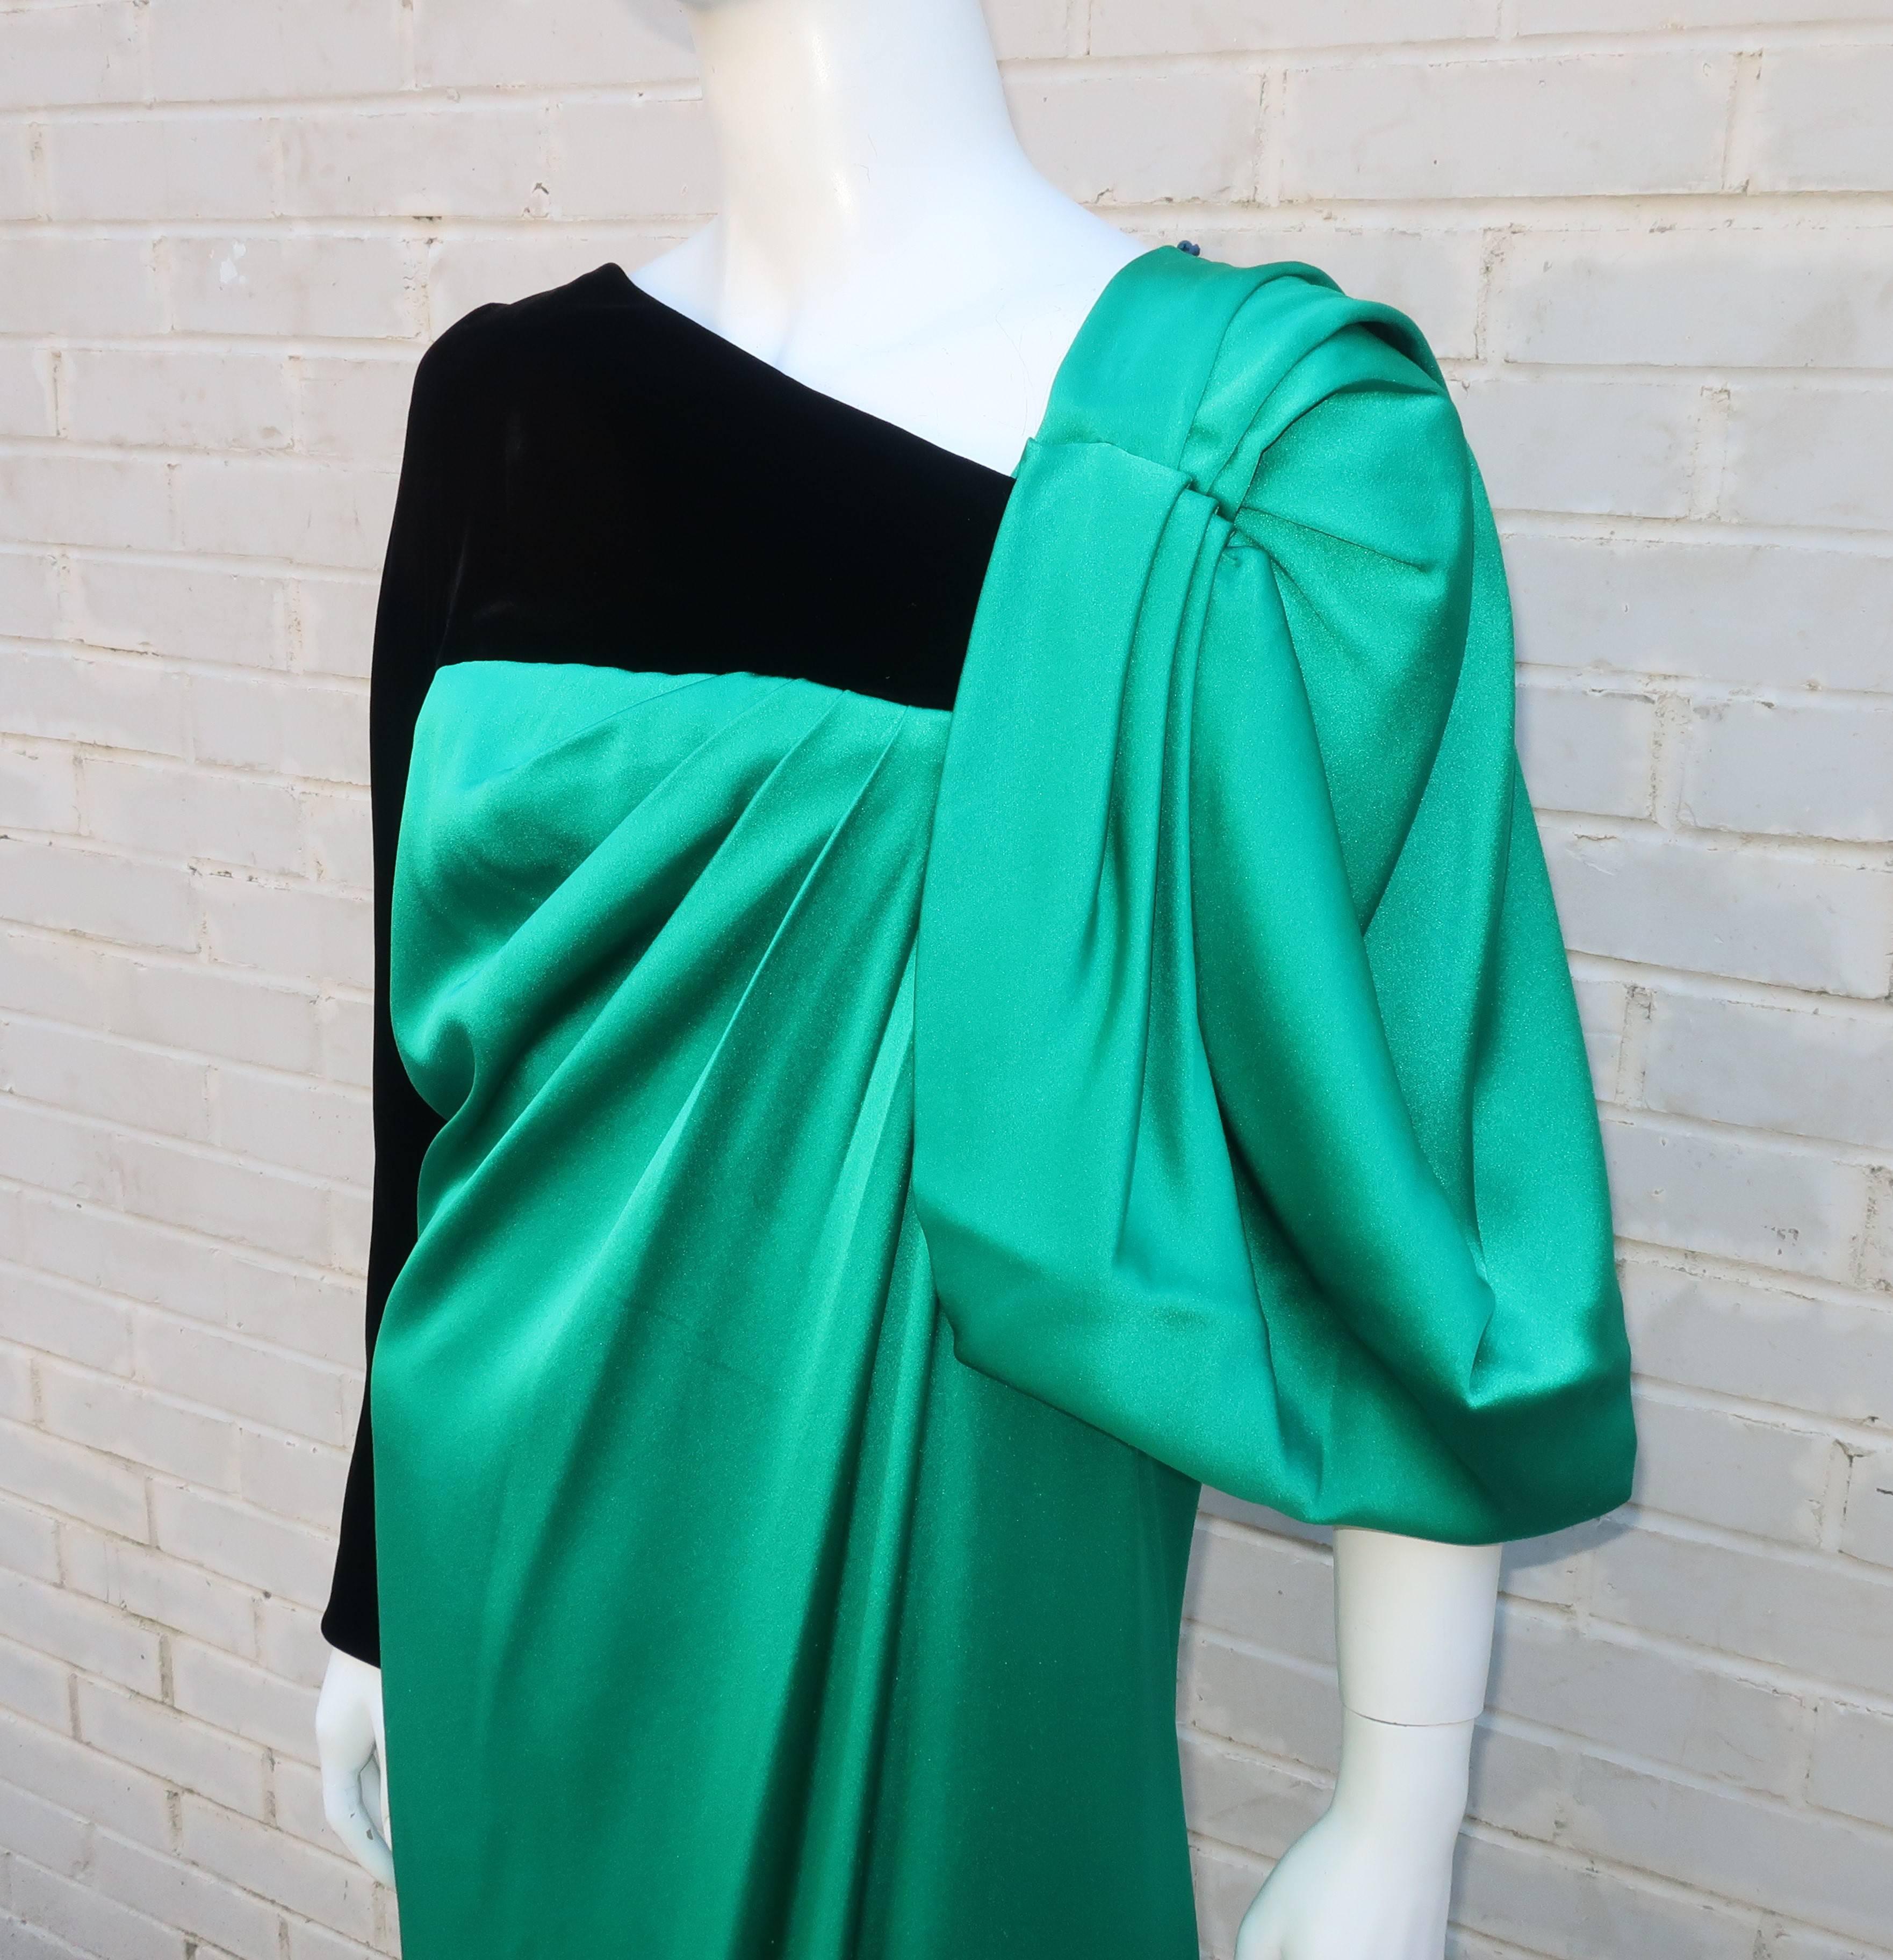 This 1980's evening gown is as stunning as its creator, Jacqueline de Ribes.  Comtesse de Ribes is as well known for her personal style and profile as she is for her fashion designs which all reflect poise, elegance and beauty.  The dress is draped